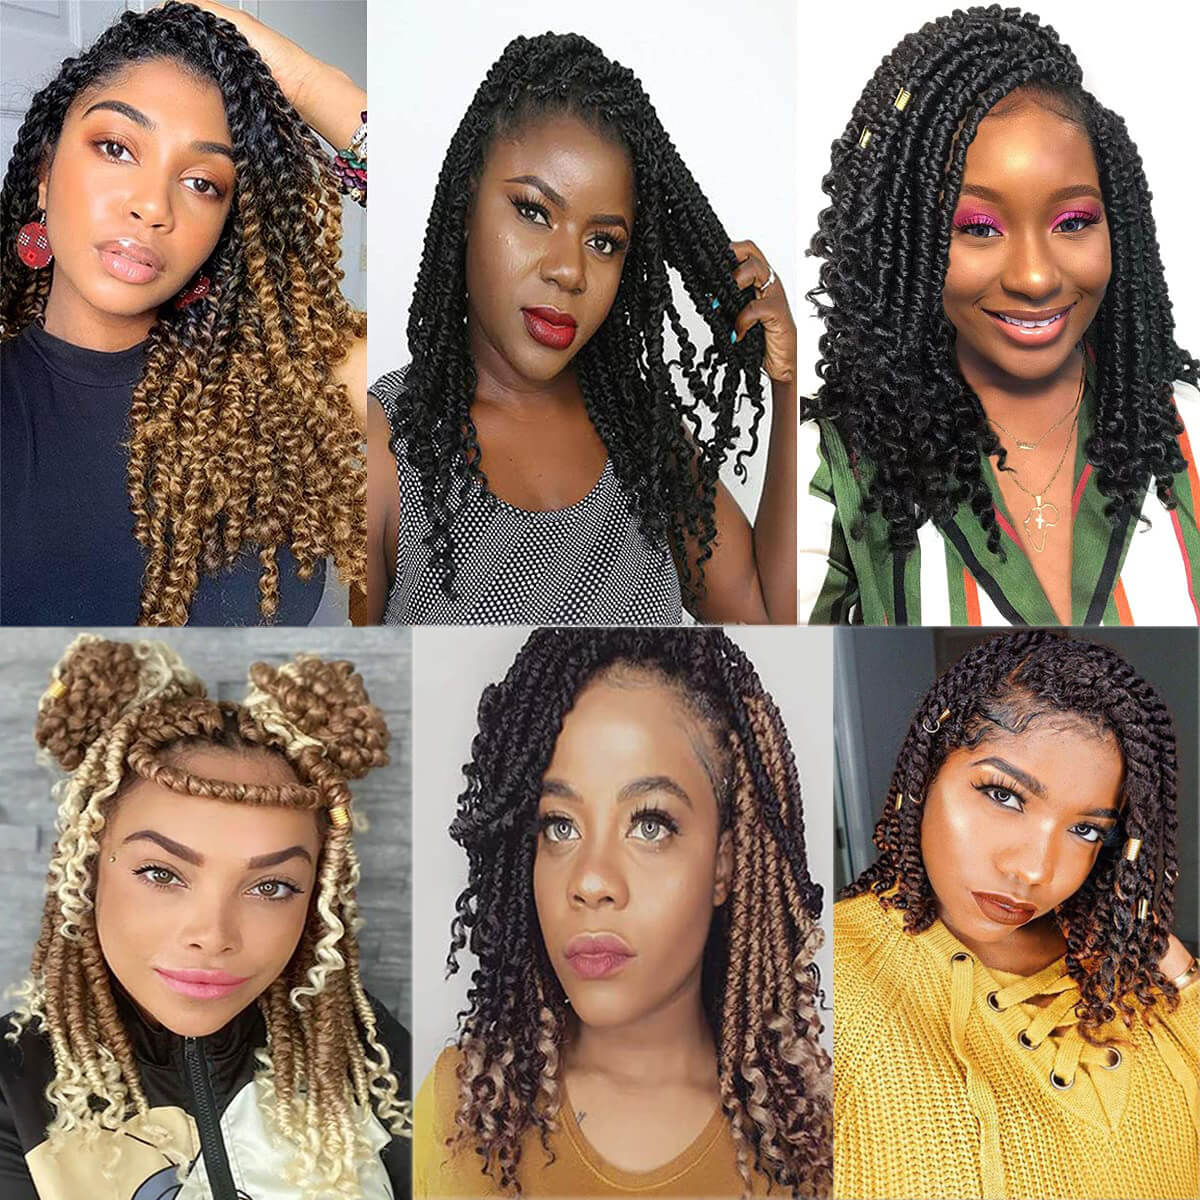 Xtrend Senegalese Spring Twist Crochet Hair Pre Looped Short 12inch Spring Twist Crochet Hair Curl End Bomb Twist Synthetic Hair